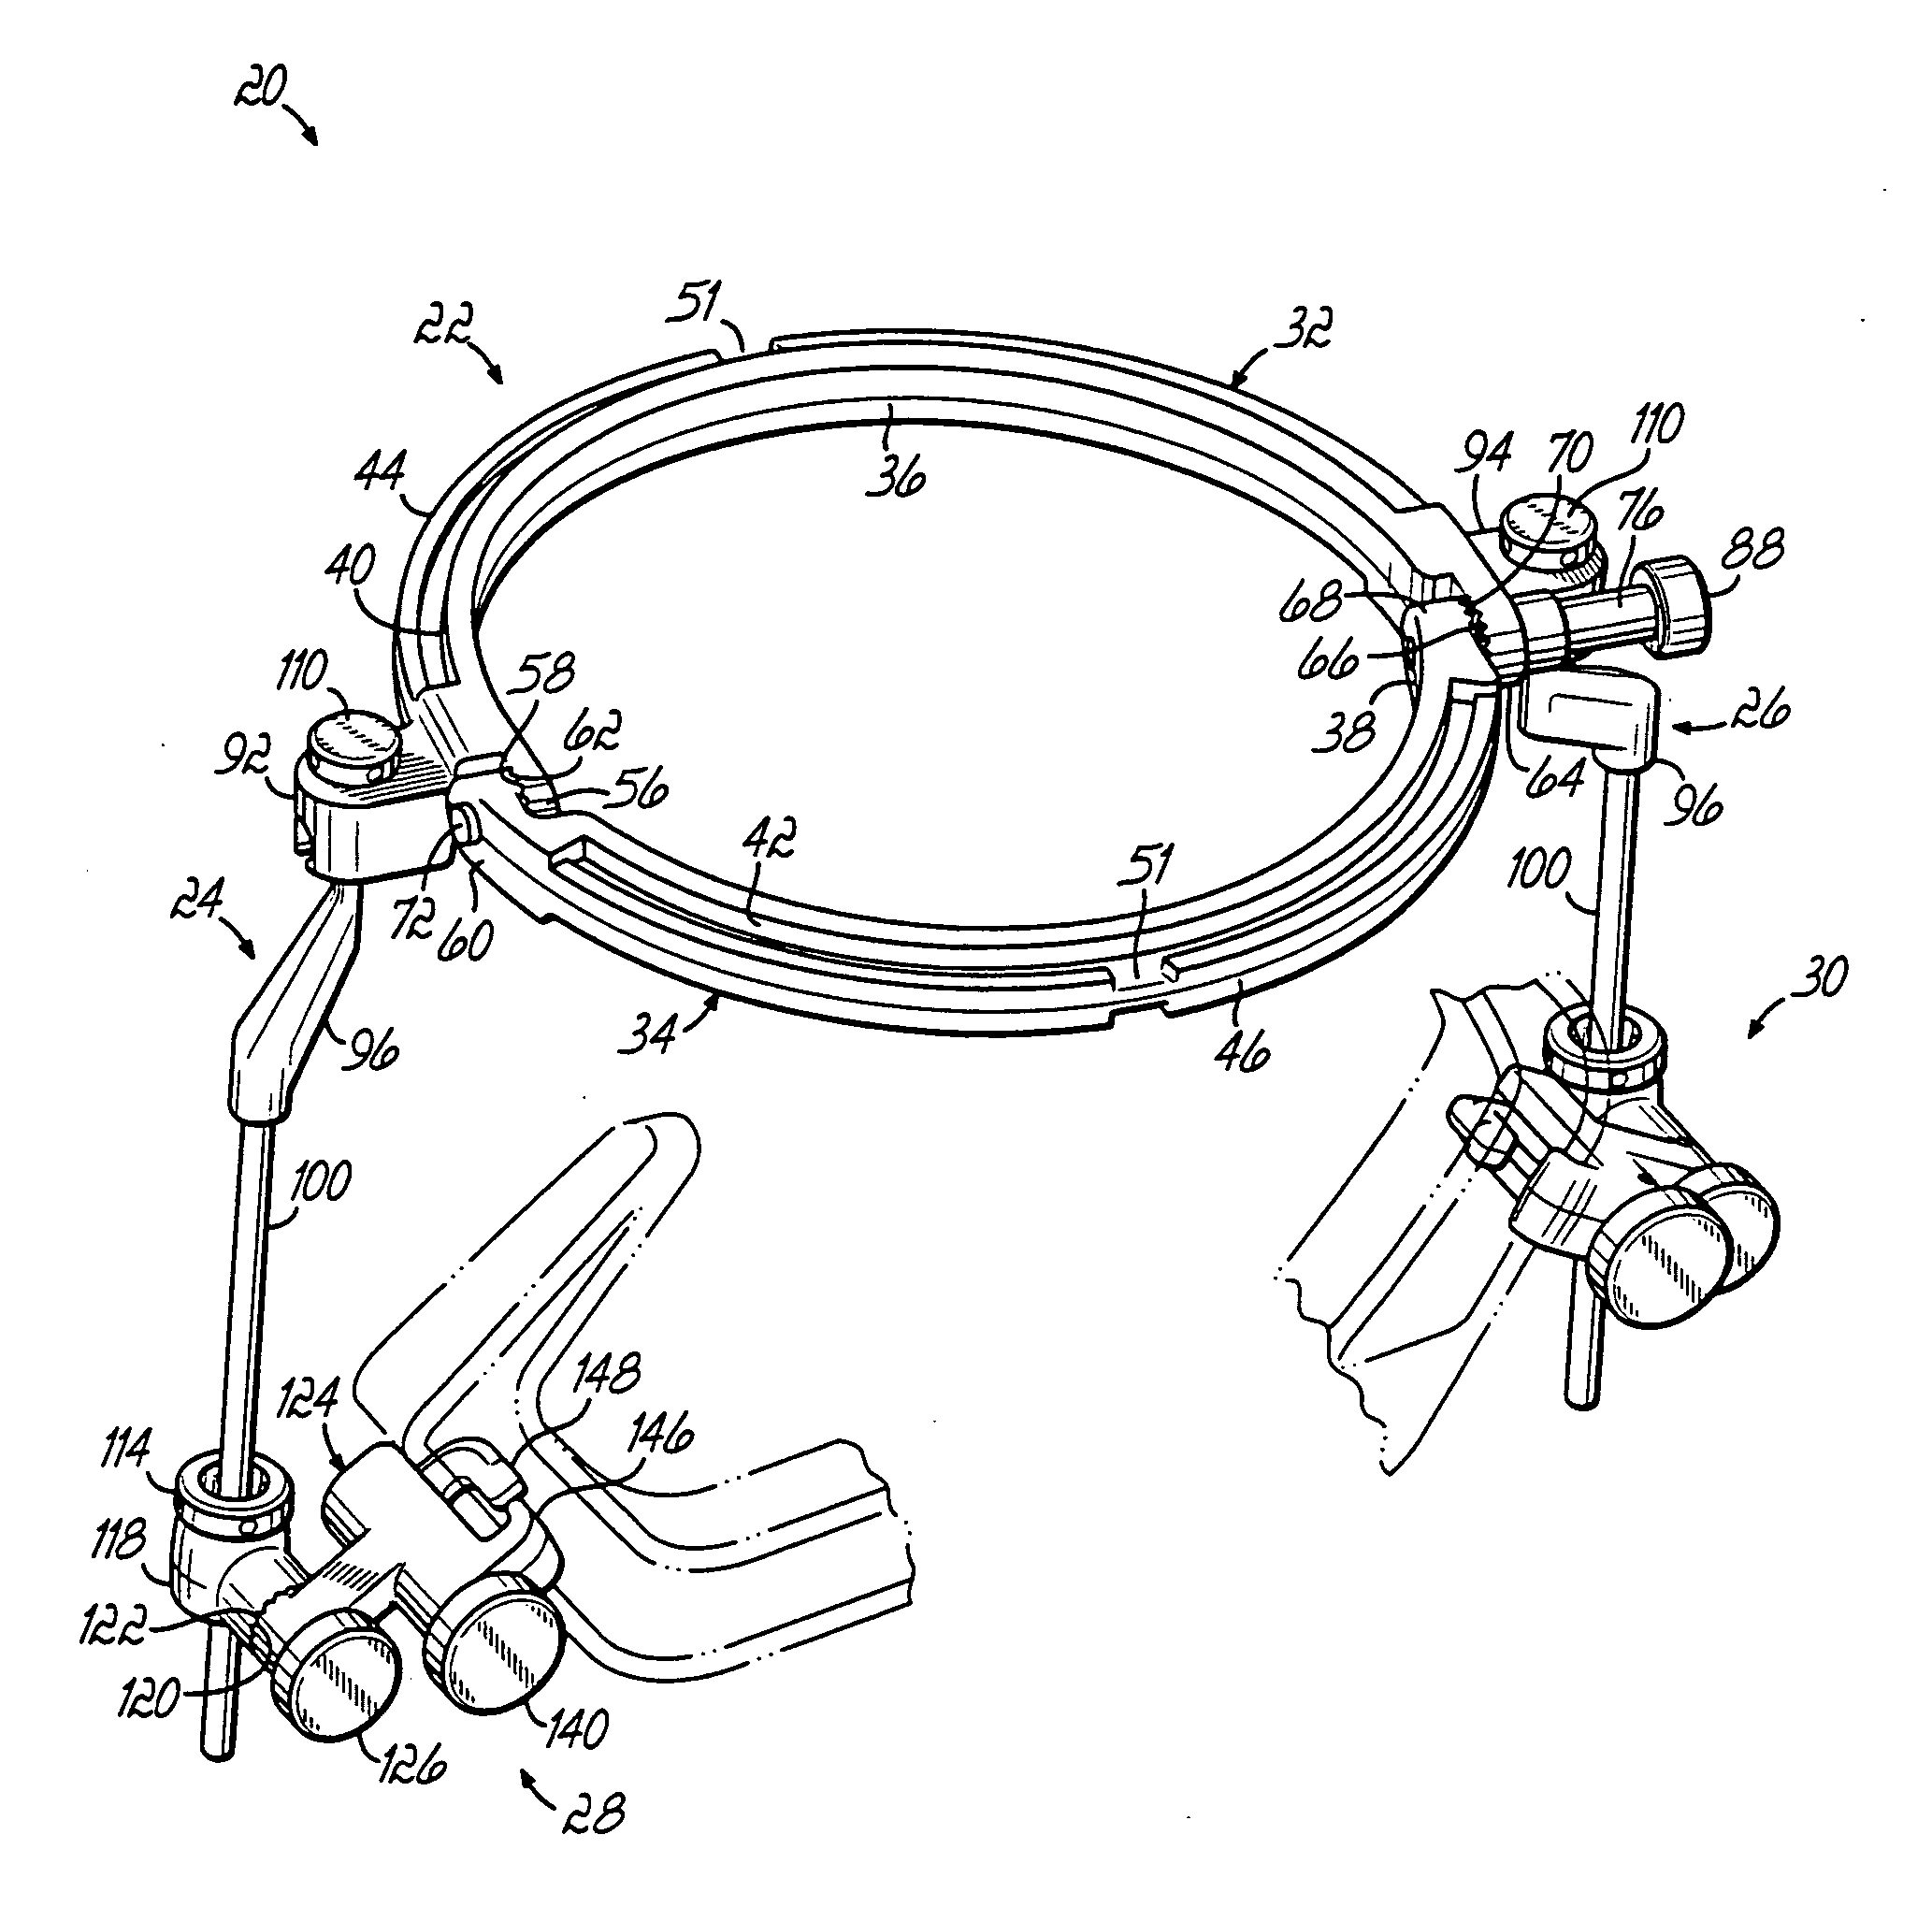 Radiolucent retractor and related components